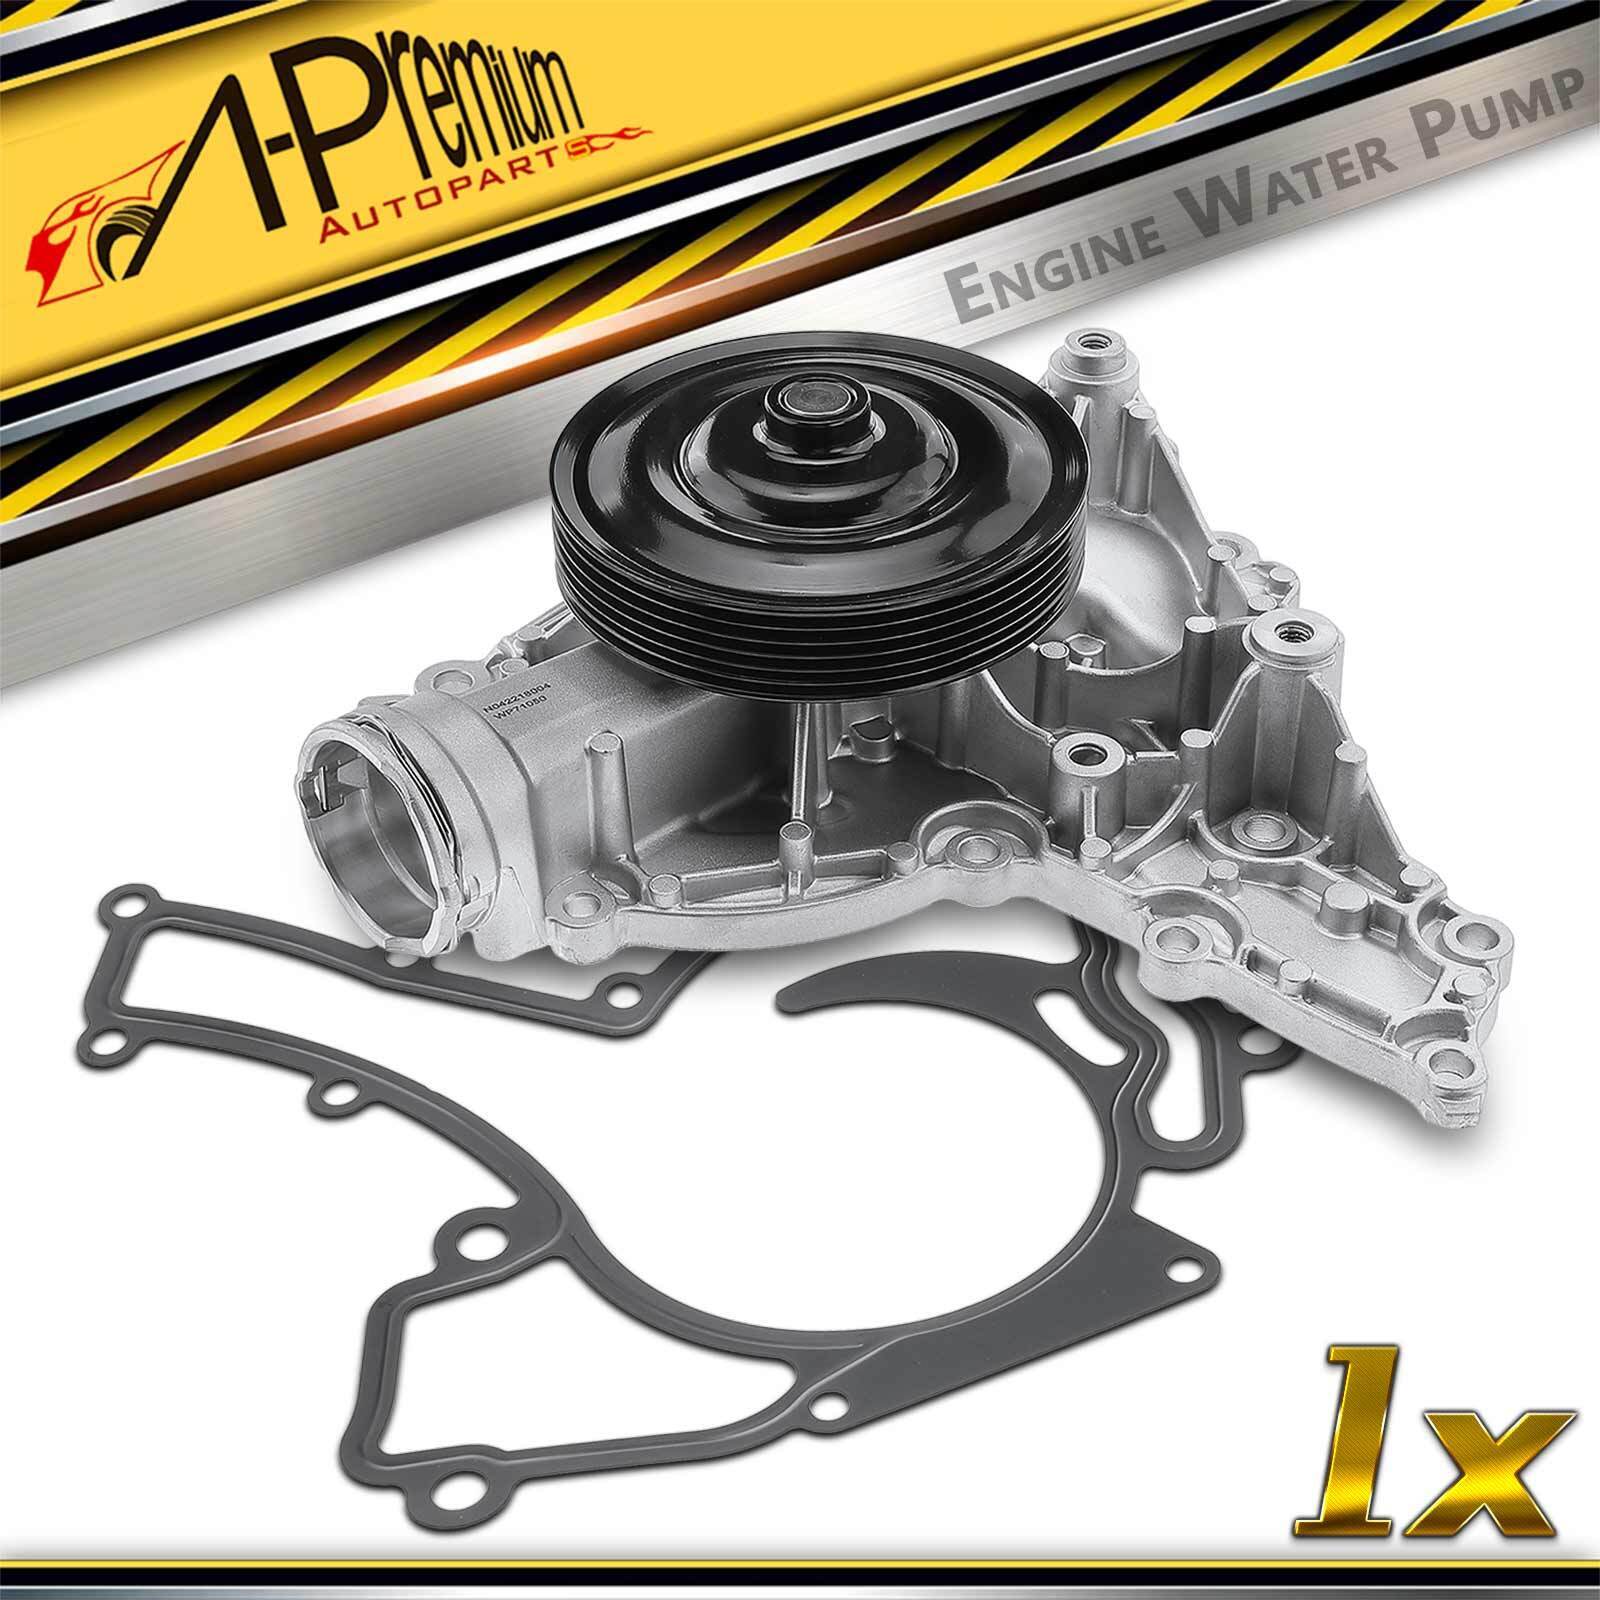 Water Pump with Gasket for Mercedes-Benz	CL550 E550 G550 GL450 S550 SL550 CLK550